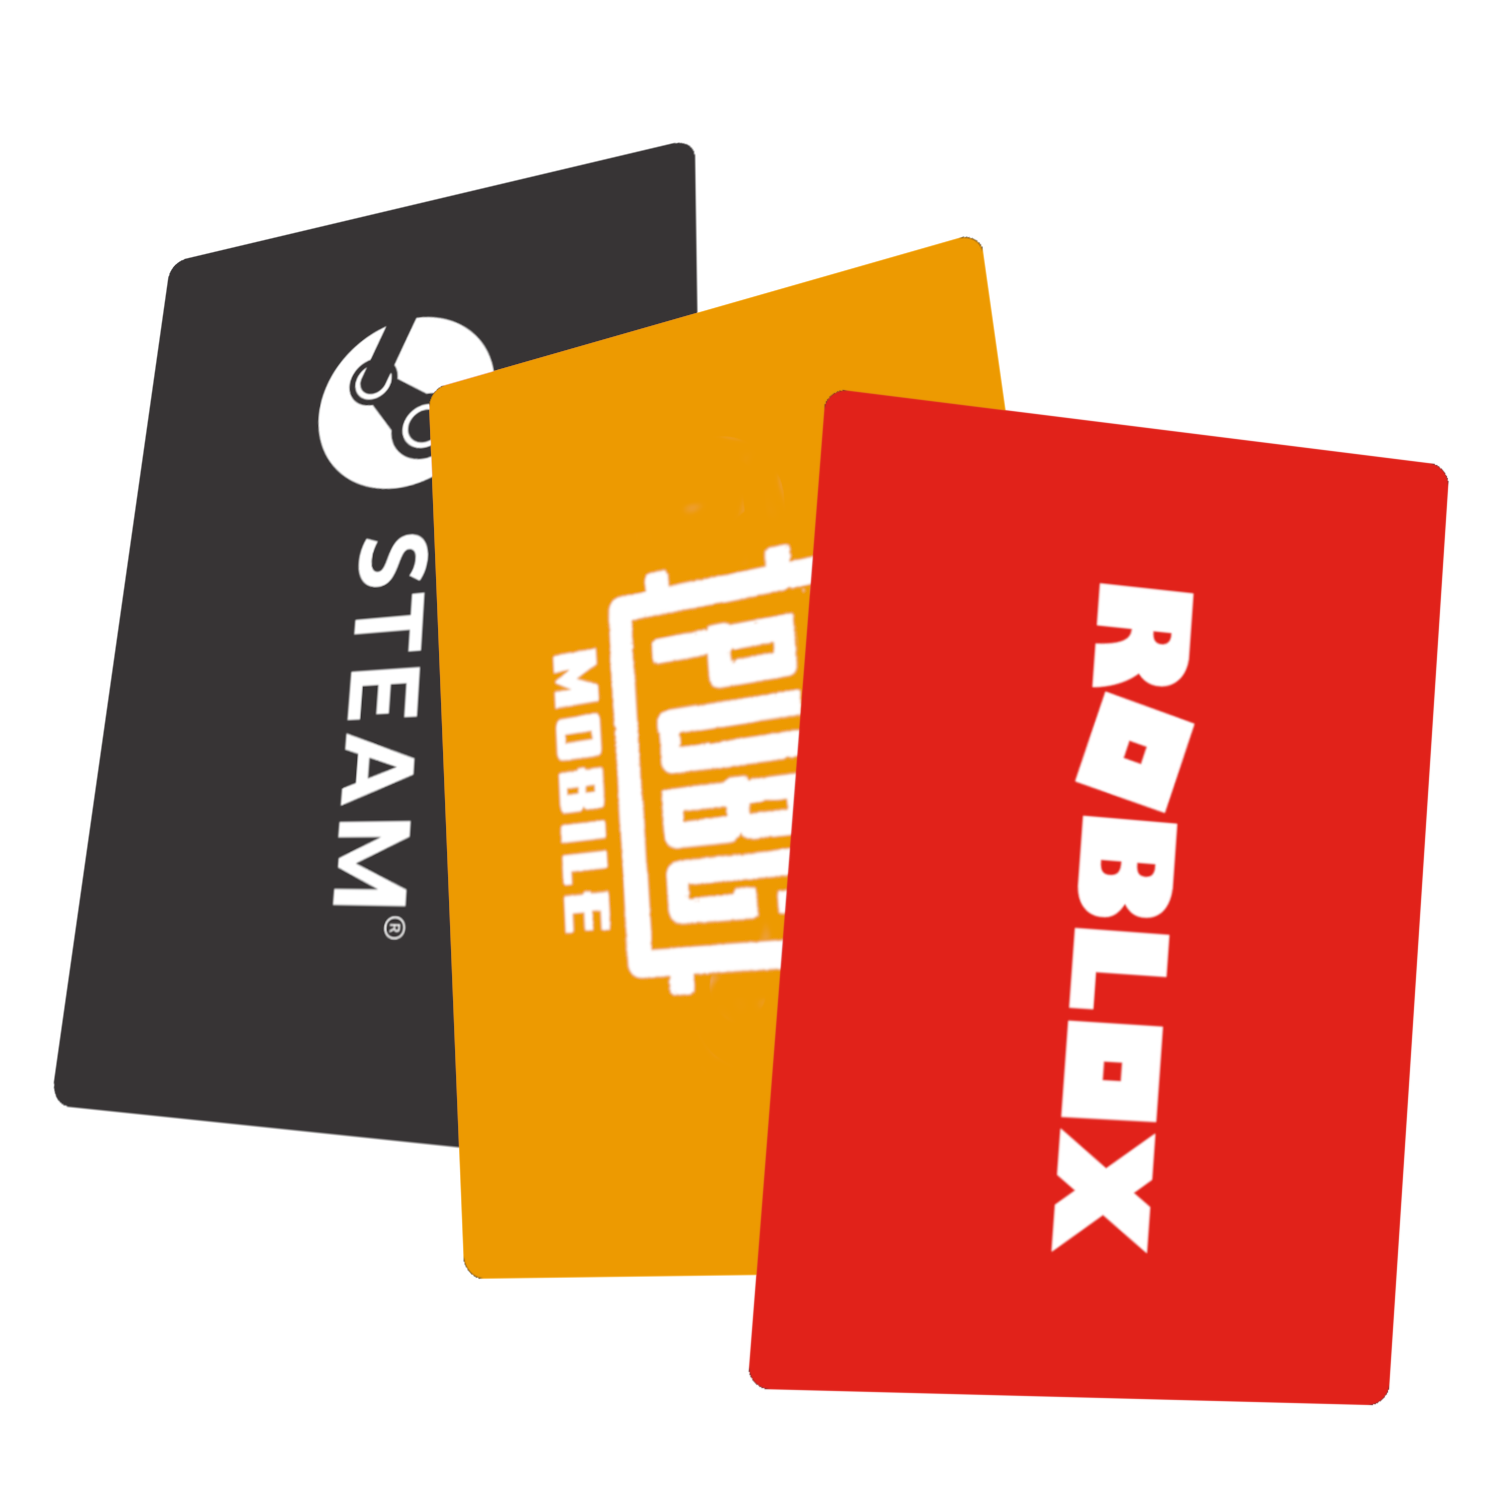 Homepage image showing various gift cards